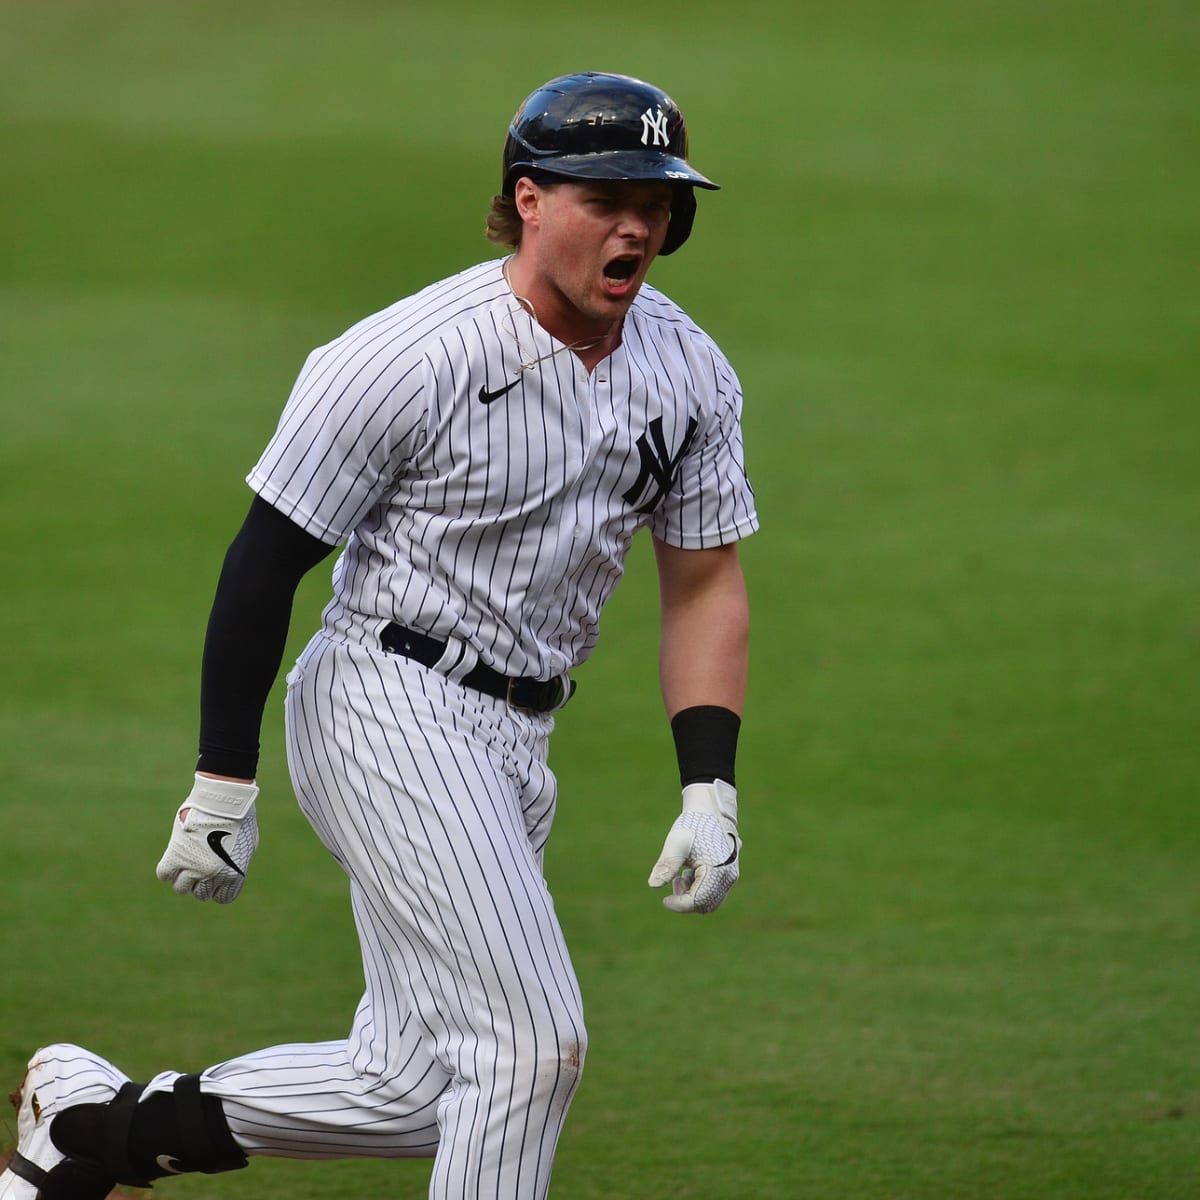 Luke Voit - MLB First base - News, Stats, Bio and more - The Athletic